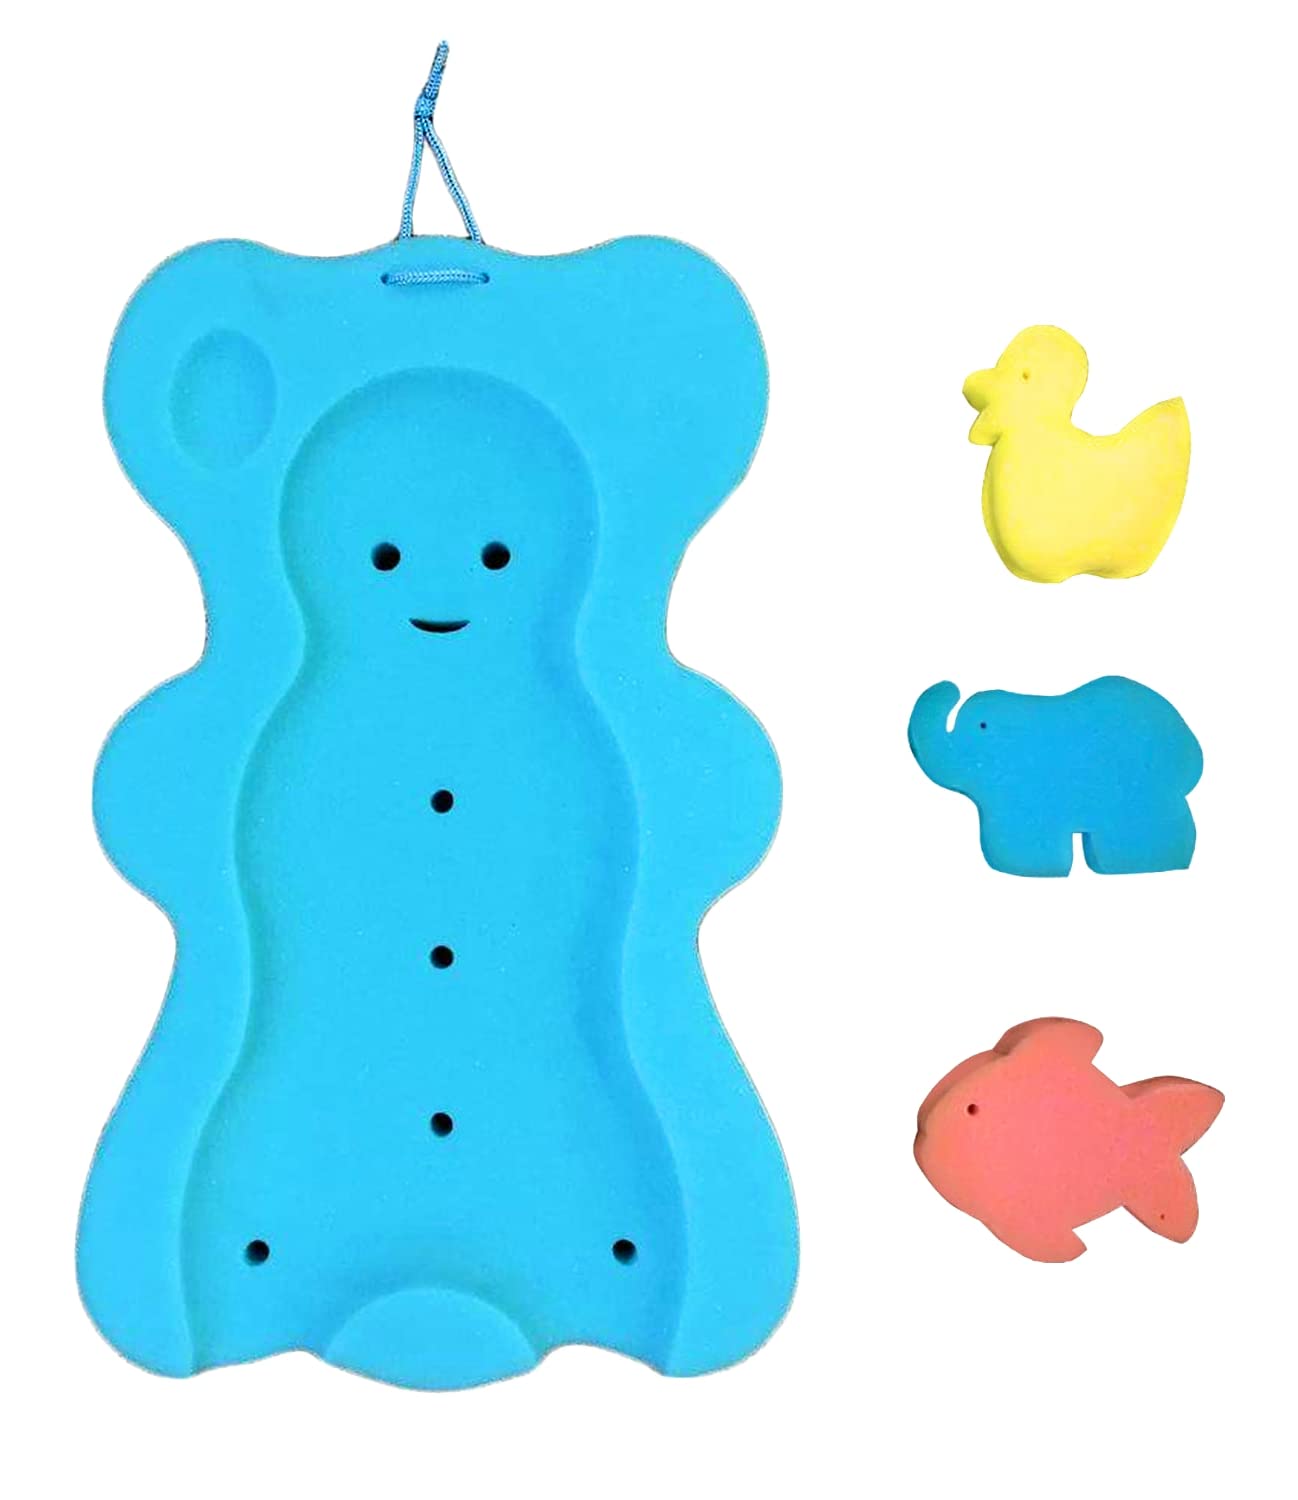 ReignDrop Baby Bath Sponge Mat for Tub – Safe Fun Sponge Bath Mat, Toys for Newborns – Toddler Bathing Cushion Insert with Inbuilt Drying Hanger – Bath Time Rest and Support for Sink (Small Bear)